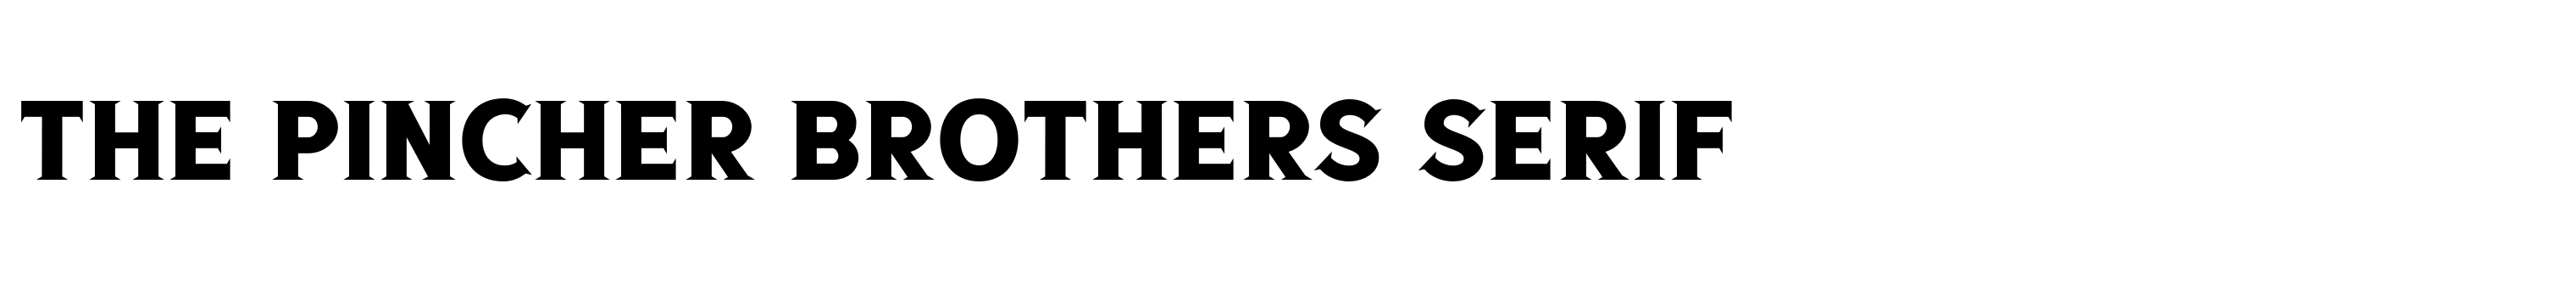 The Pincher Brothers Serif